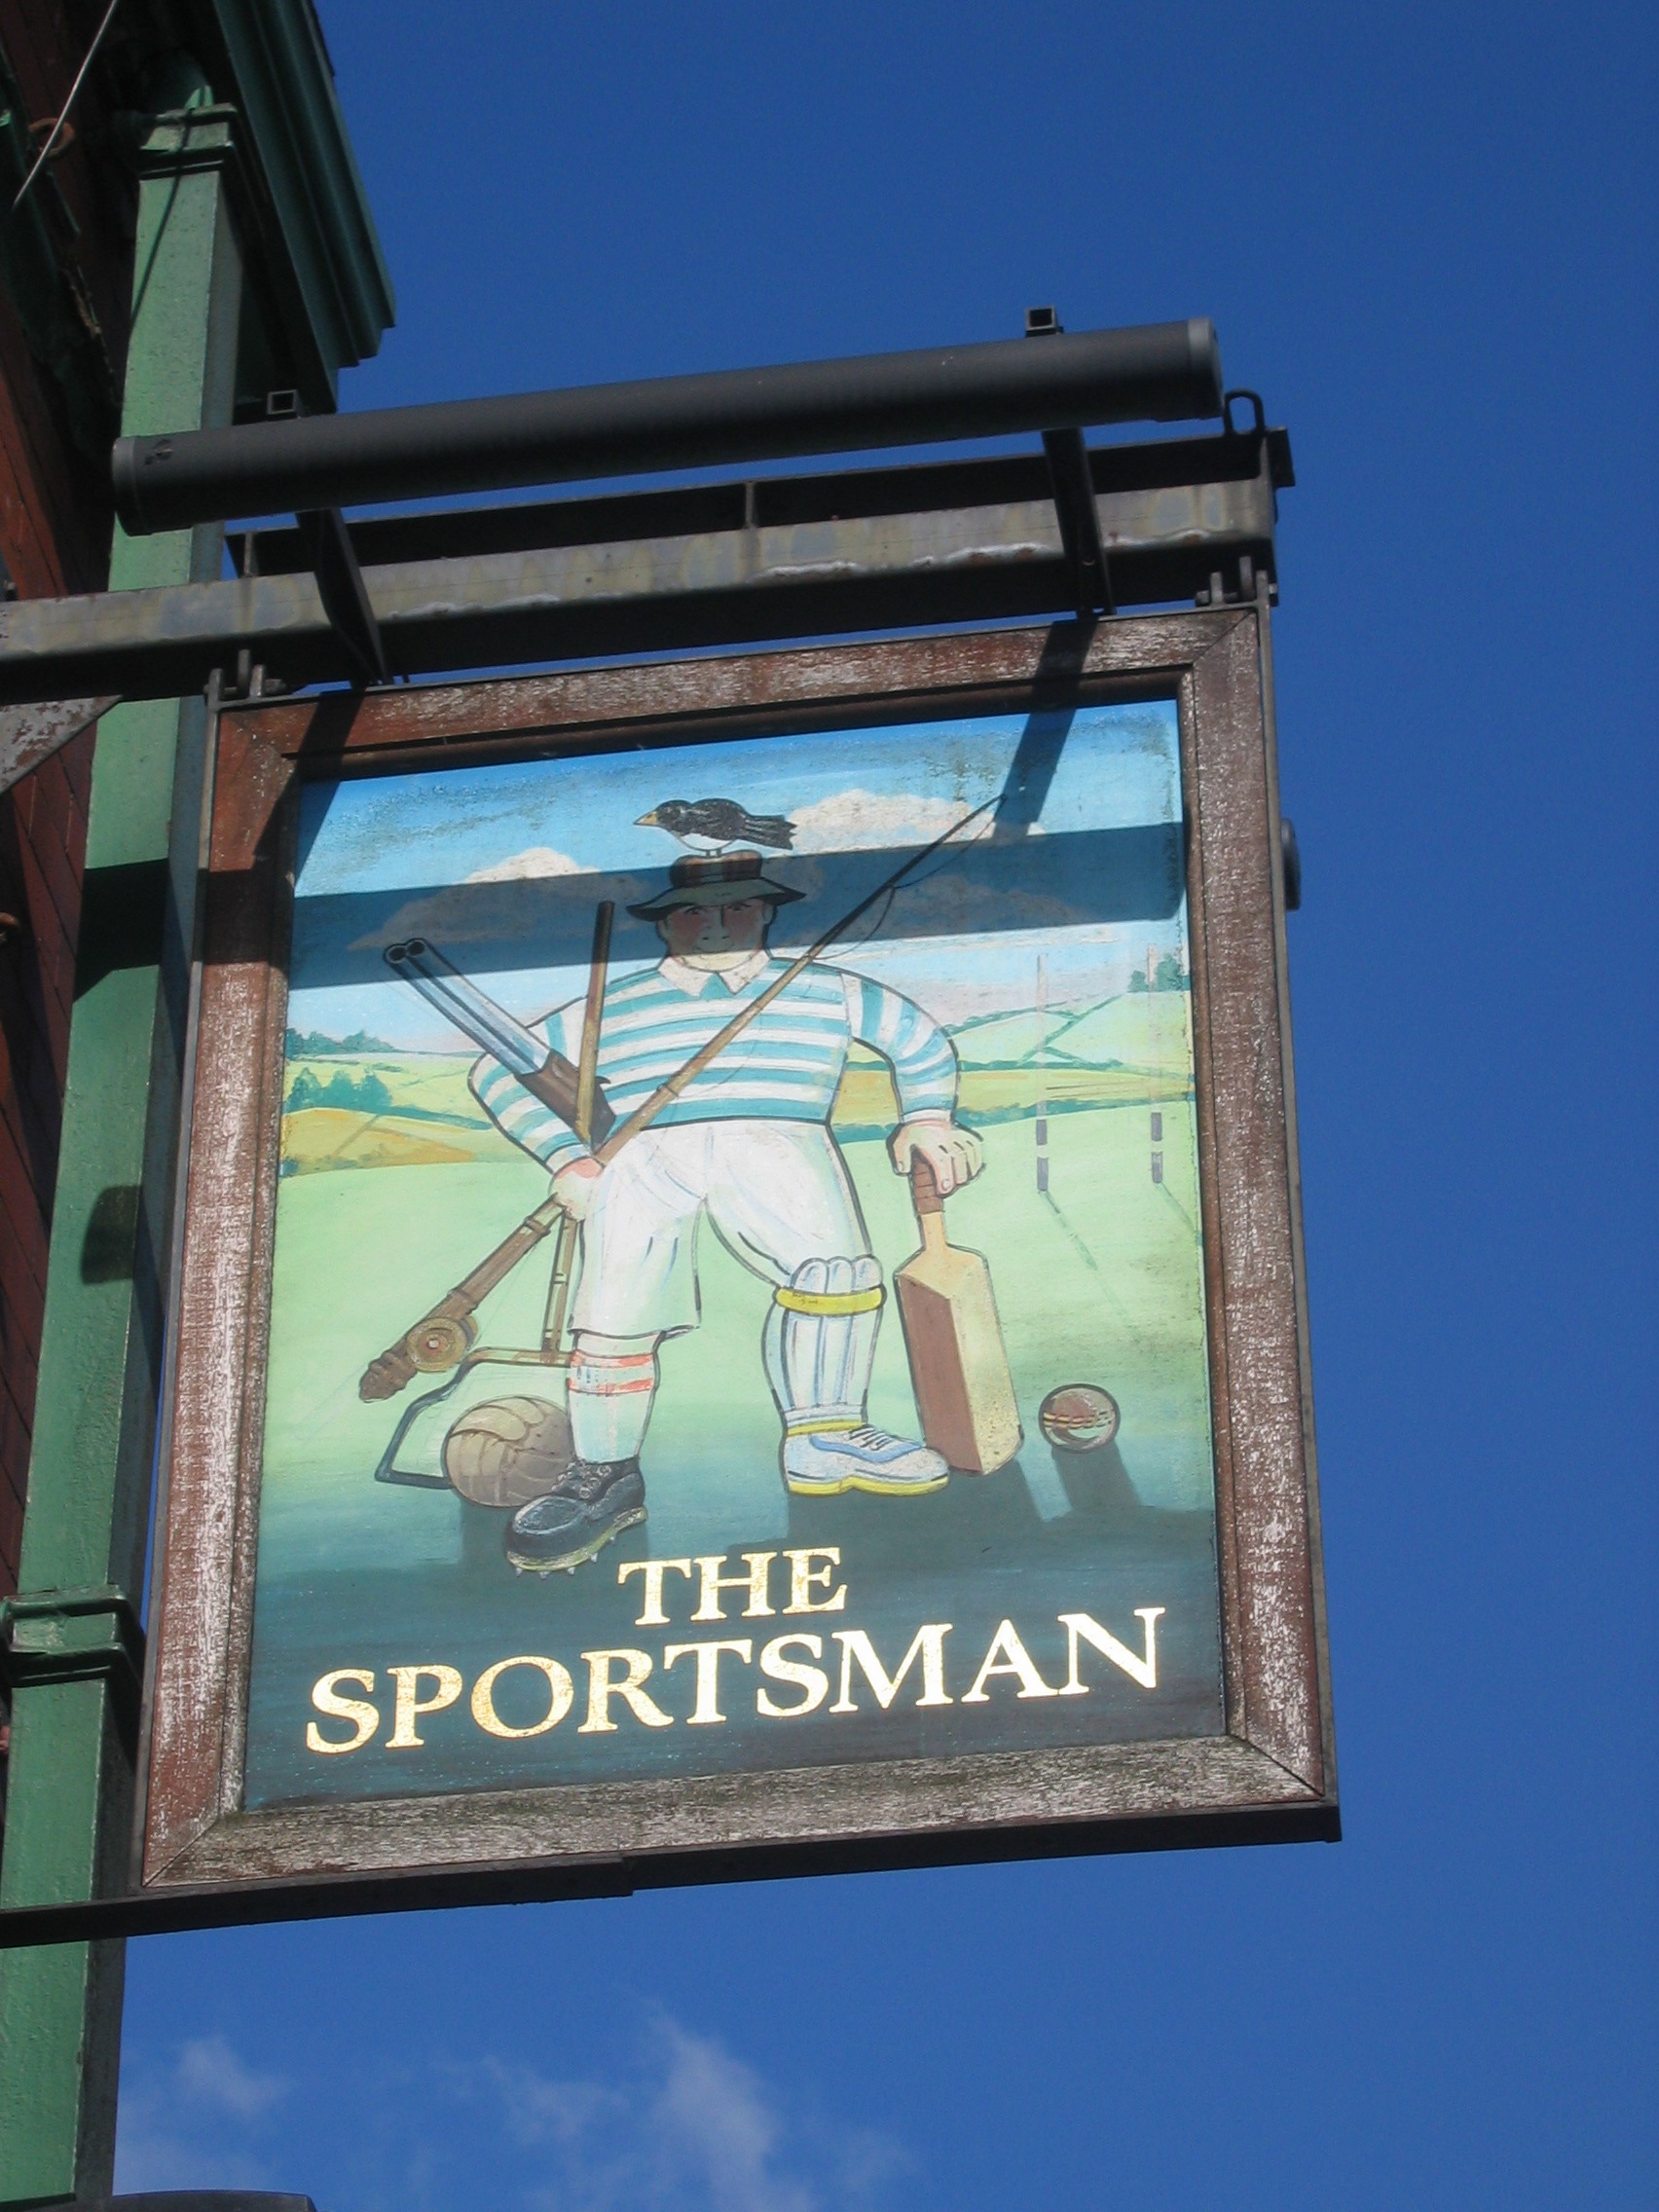 Pub sign photo – The Sportsman, Hyde, Manchester, taken by me